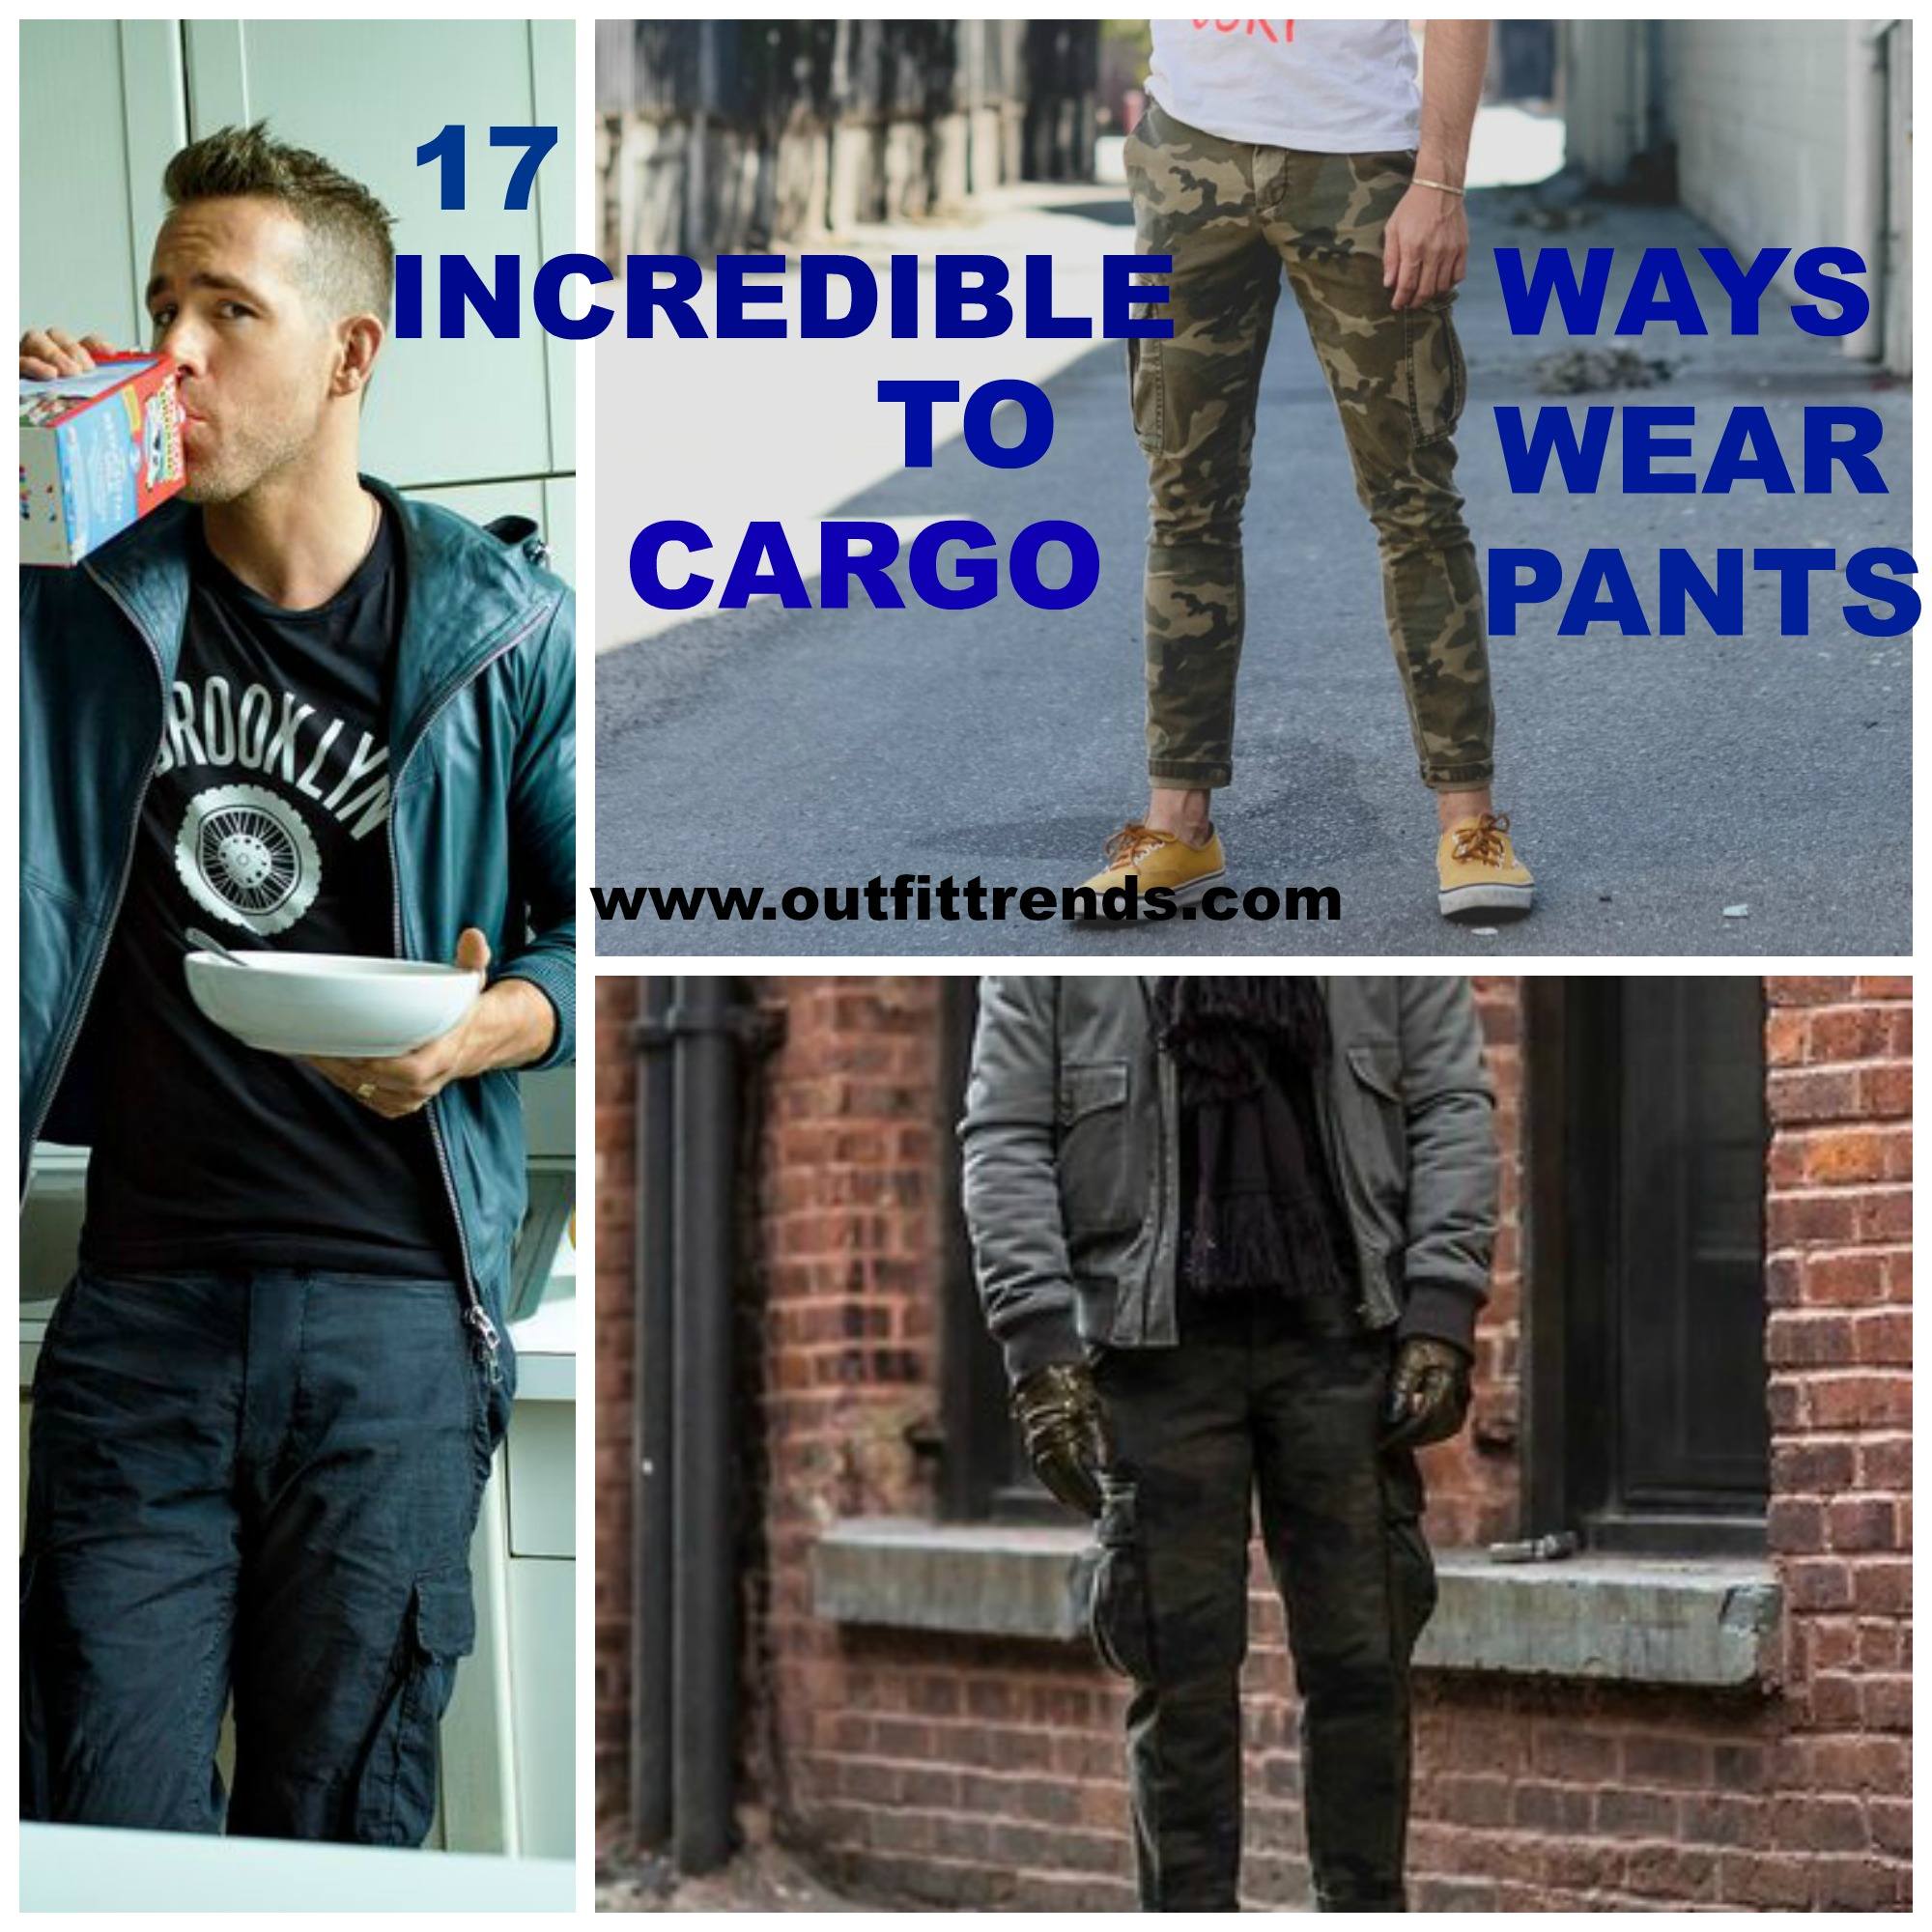 How To Style Black Cargo Pants Black Cargo Pants Outfit Ideas | vlr.eng.br